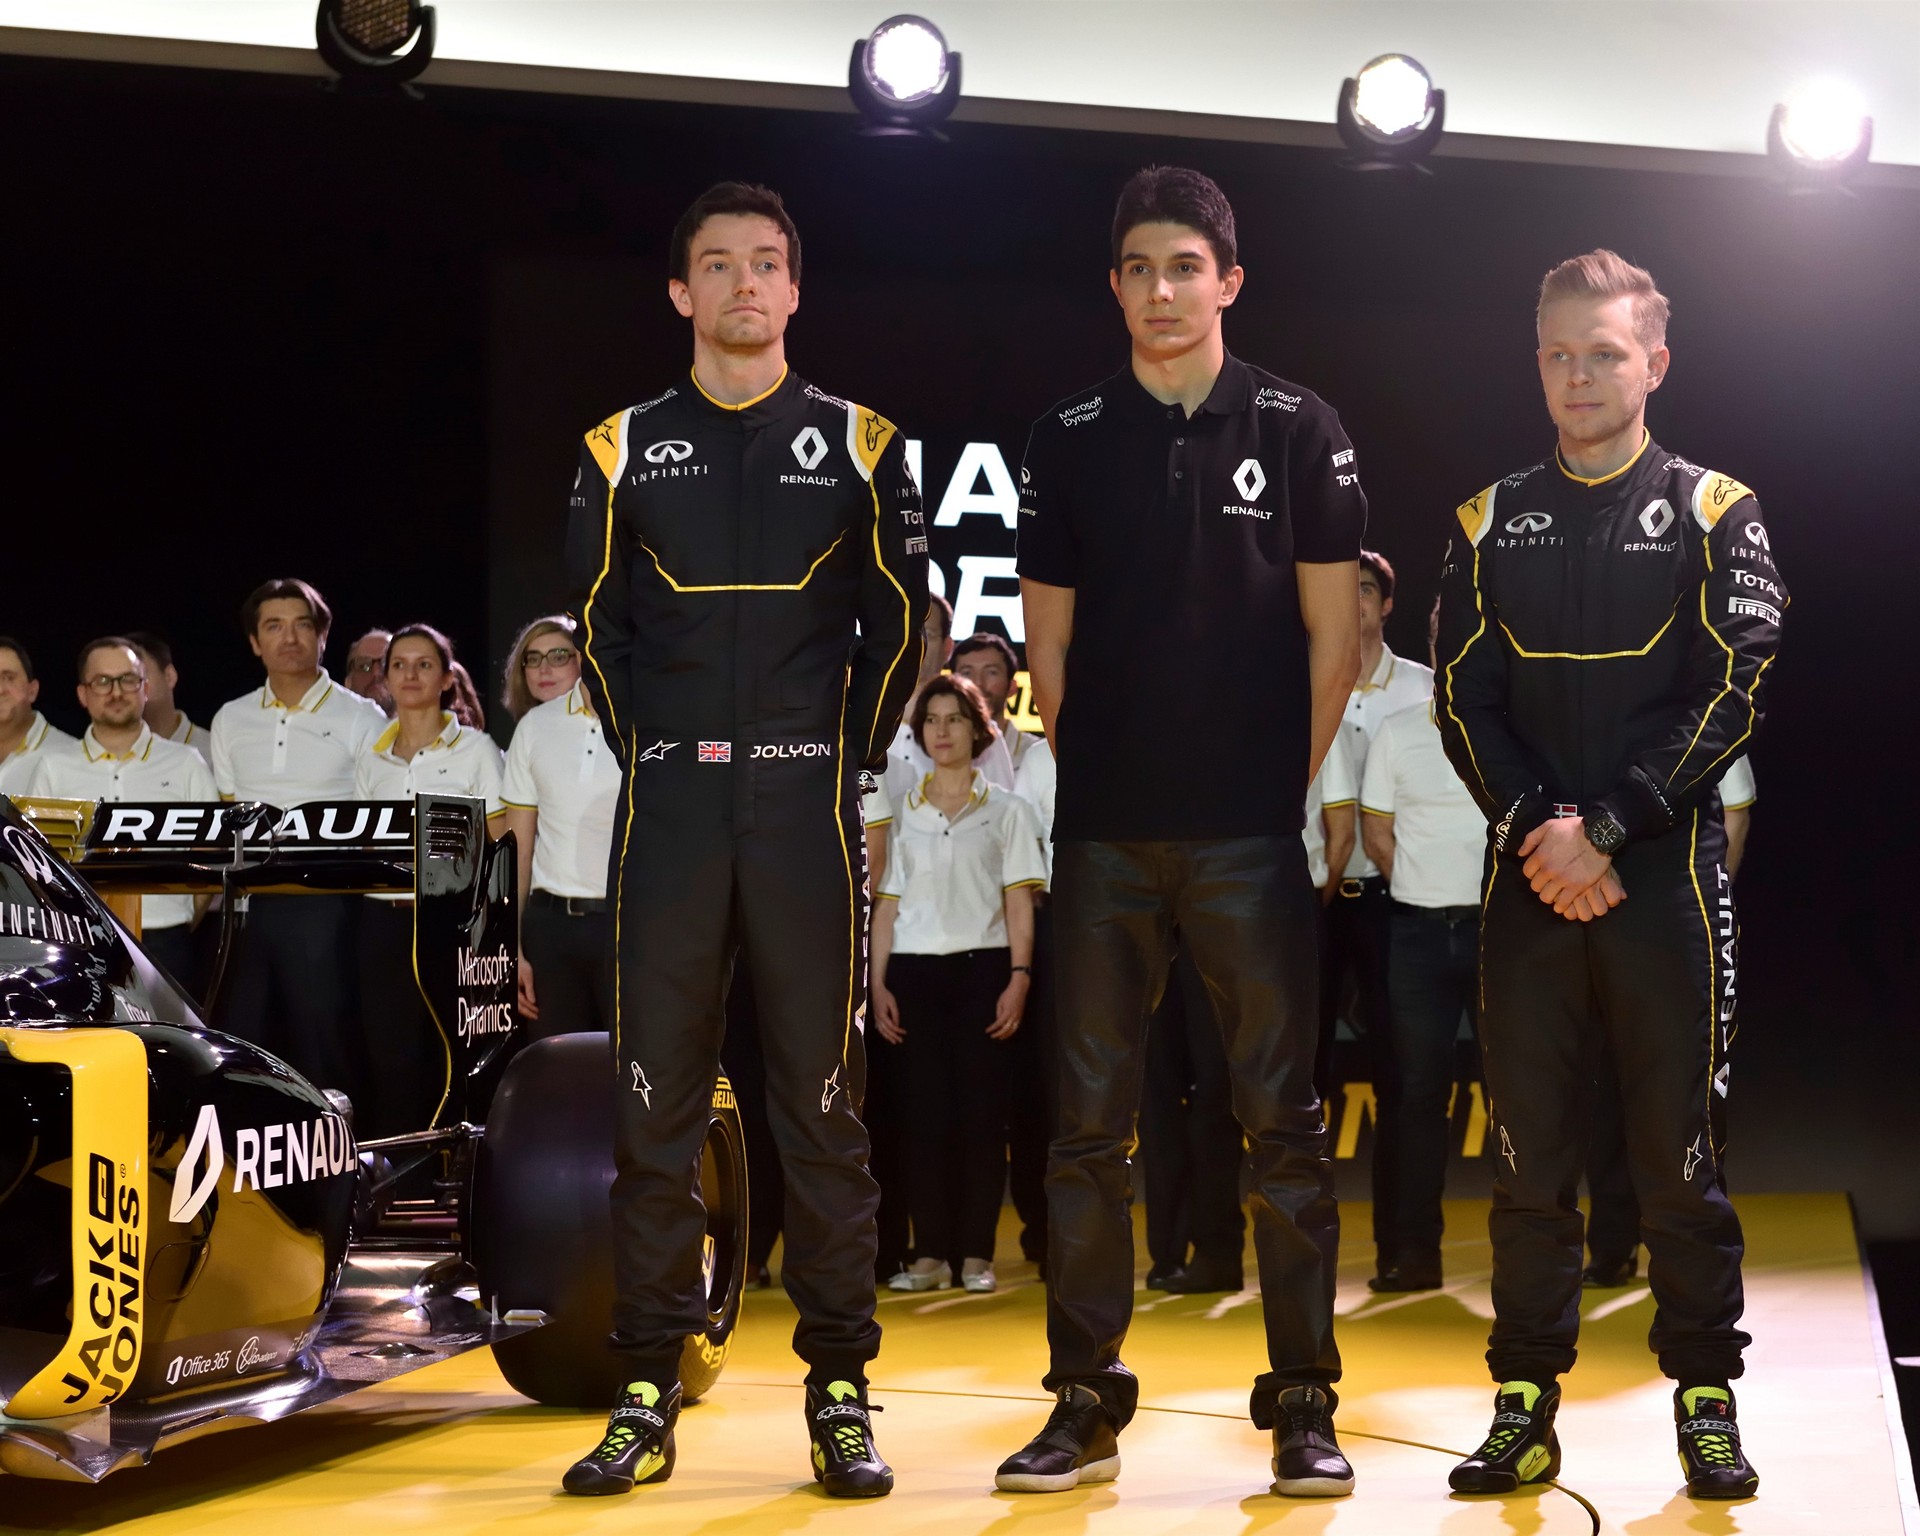 Infiniti's successful involvement in Formula One enters the next phase. Starting with the new 2016 season, Infiniti will be a technical partner of the new Renault Sport Formula One team. Leveraging its expertise in performance hybrids, Infiniti will contribute engineering resources to the Renault Energy F1 Power Unit's Energy Recovery System (ERS), which incorporates two motor generator units, the MGU-H and MGU-K, and a battery © Nissan Motor Co., Ltd.